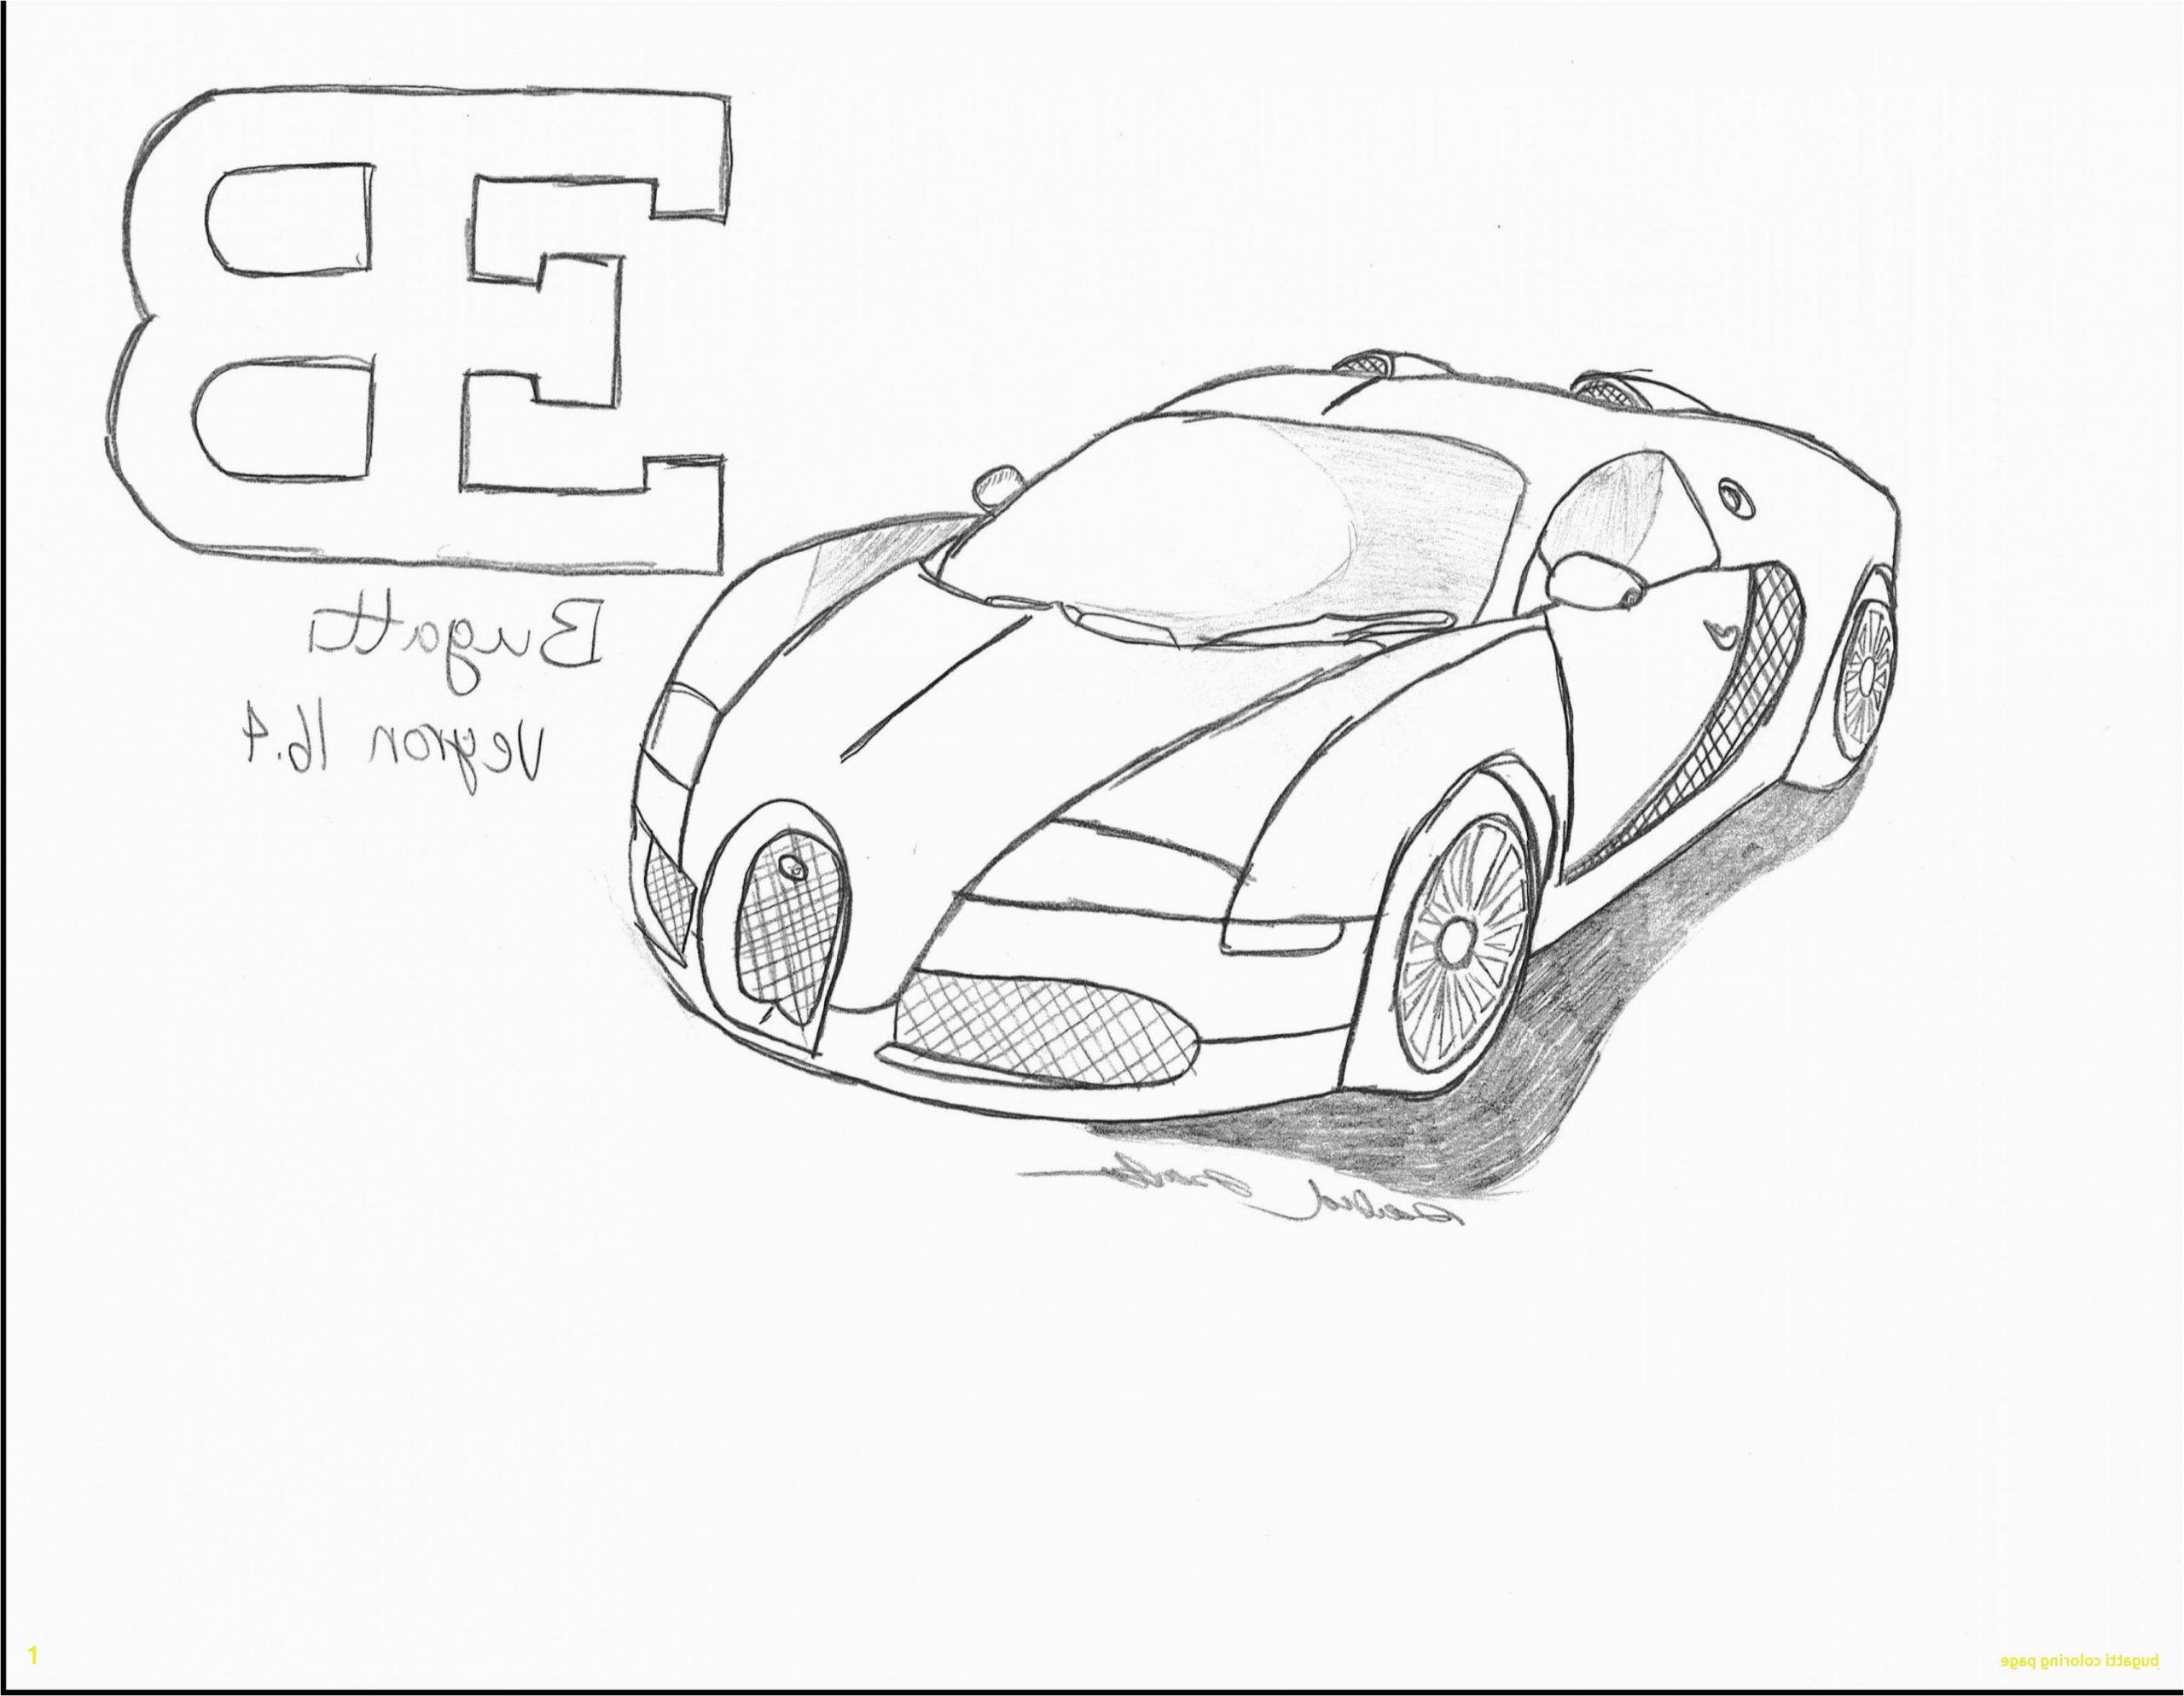 sports car coloring page awesome image bugatti coloring pages bugatti chiron kleurplaat archidev frisch of sports car coloring page